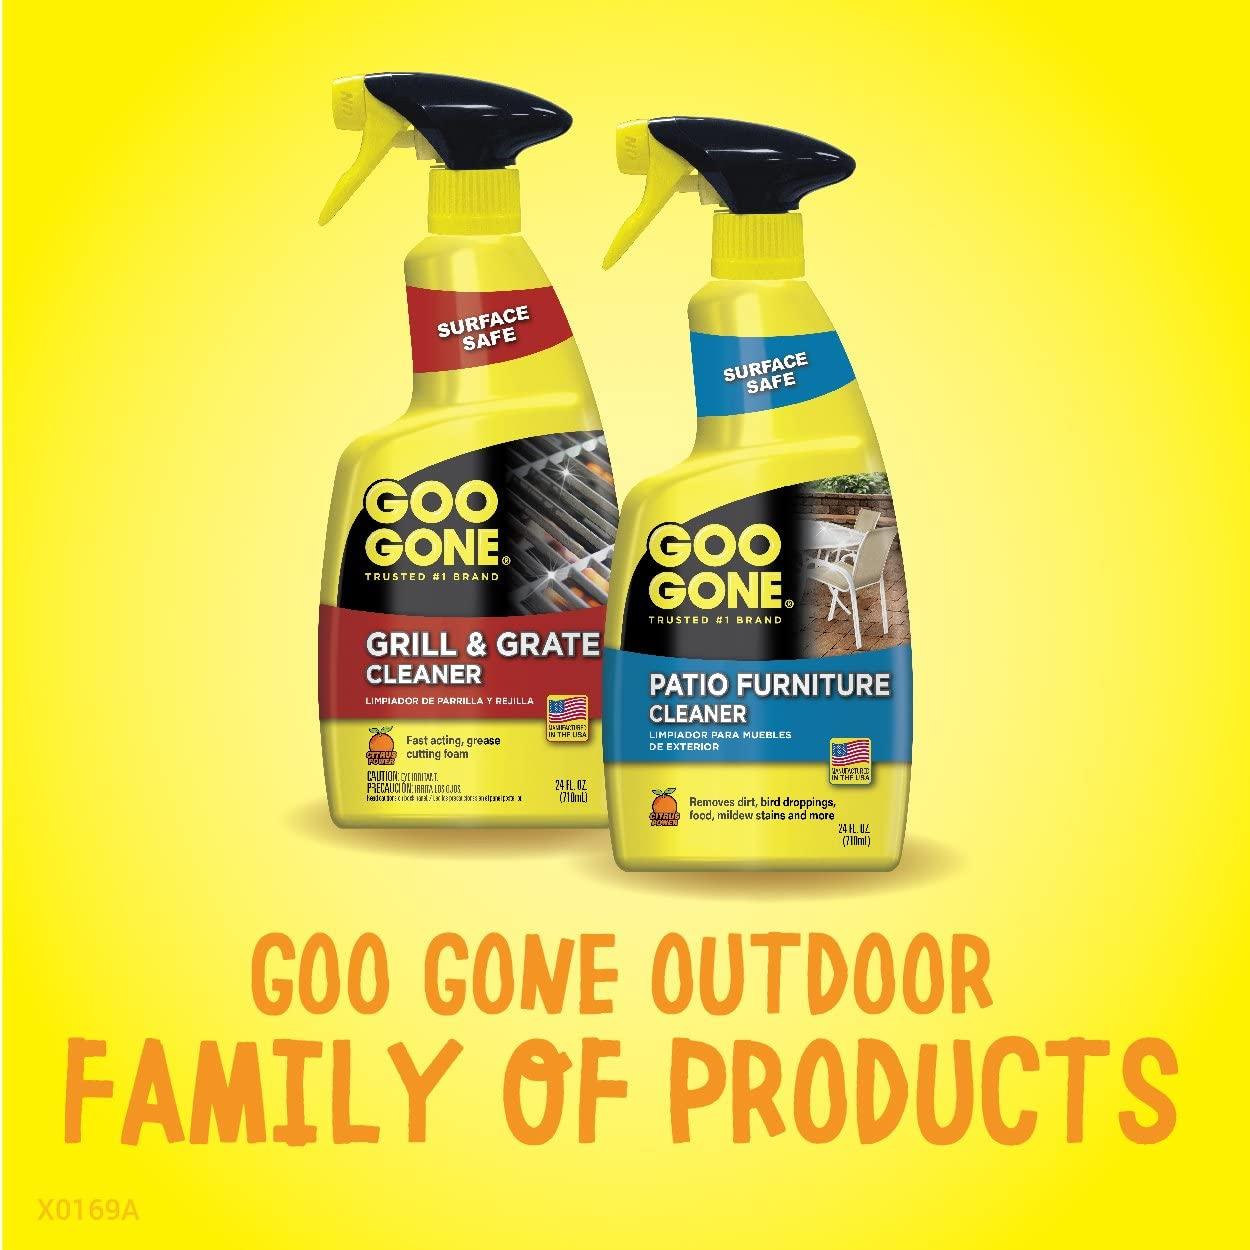 Goo Gone Oven and Grill Cleaner - 28 Ounce - Removes Tough Baked On Grease  and Food Spills Surface Safe 28 Fl Oz (Pack of 1)